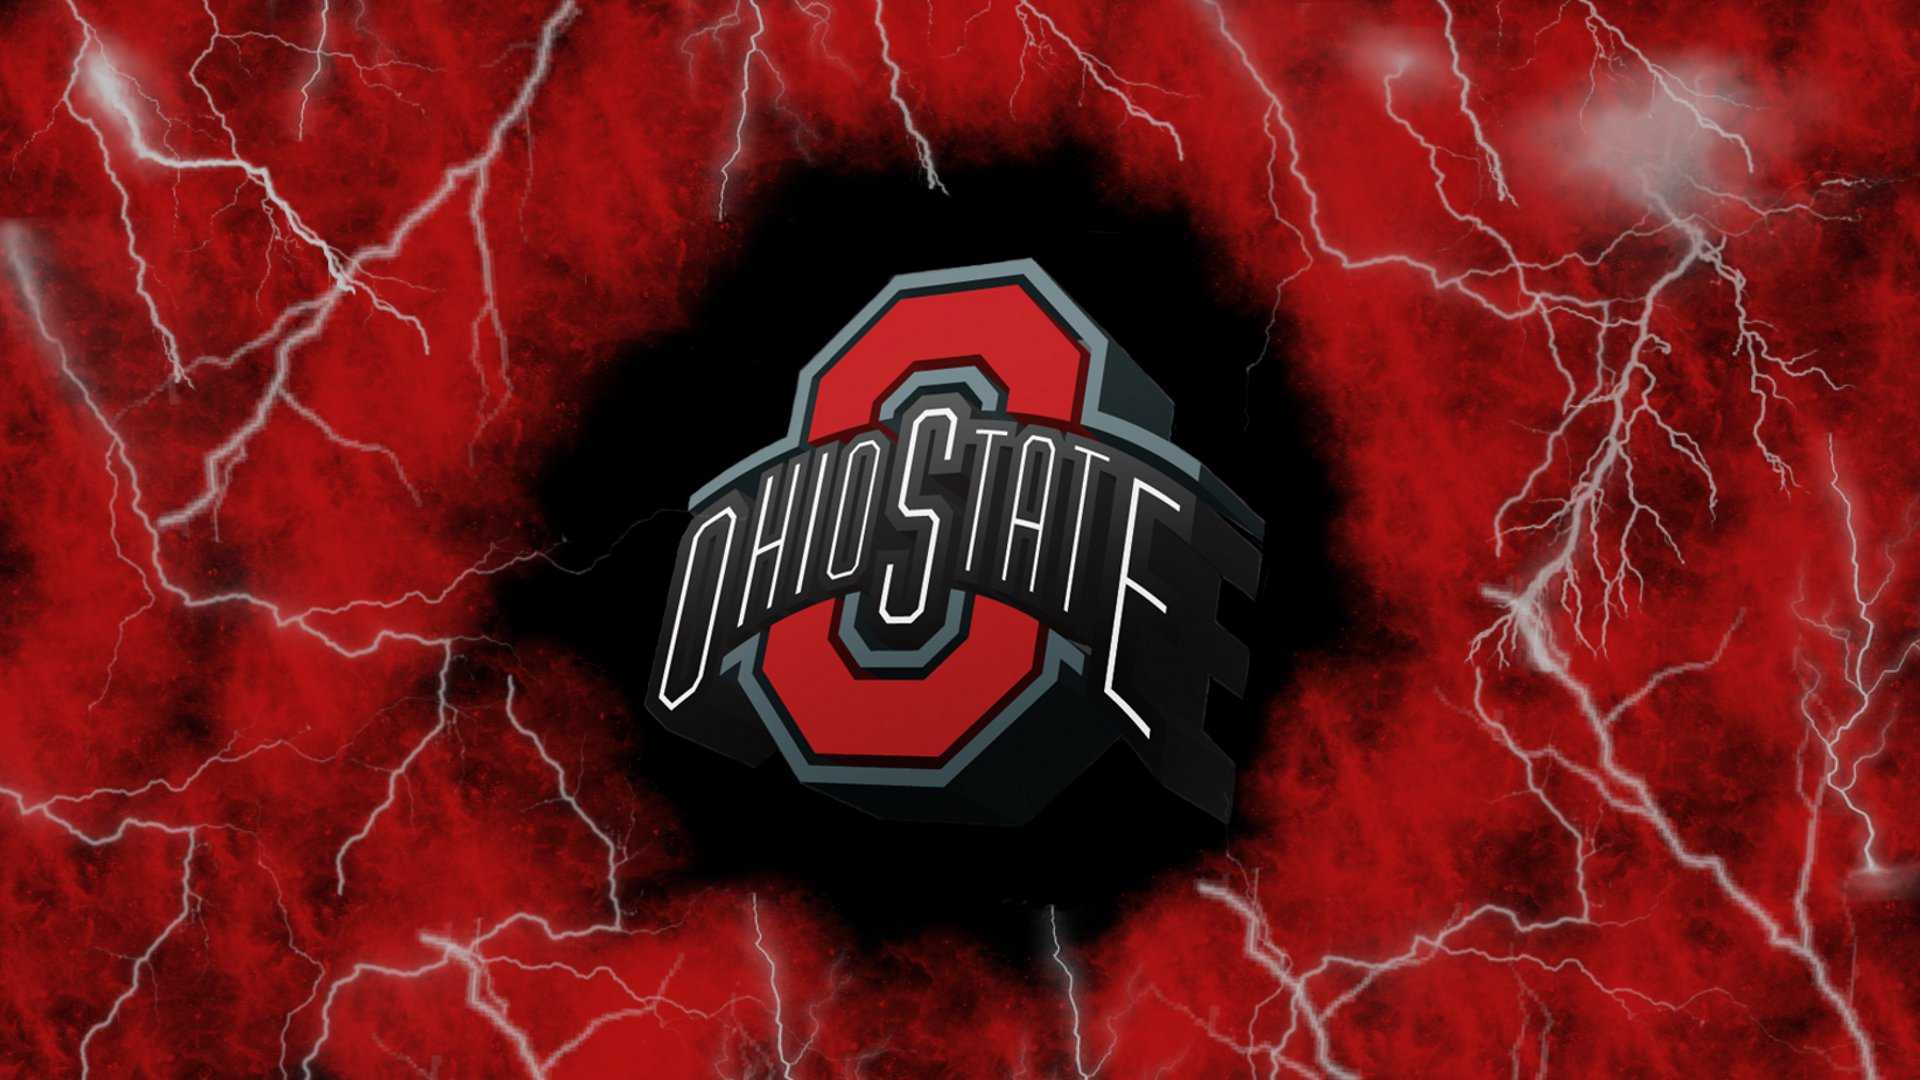 Ohio State Buckeyes Wallpaper High Quality Background For Every Fan